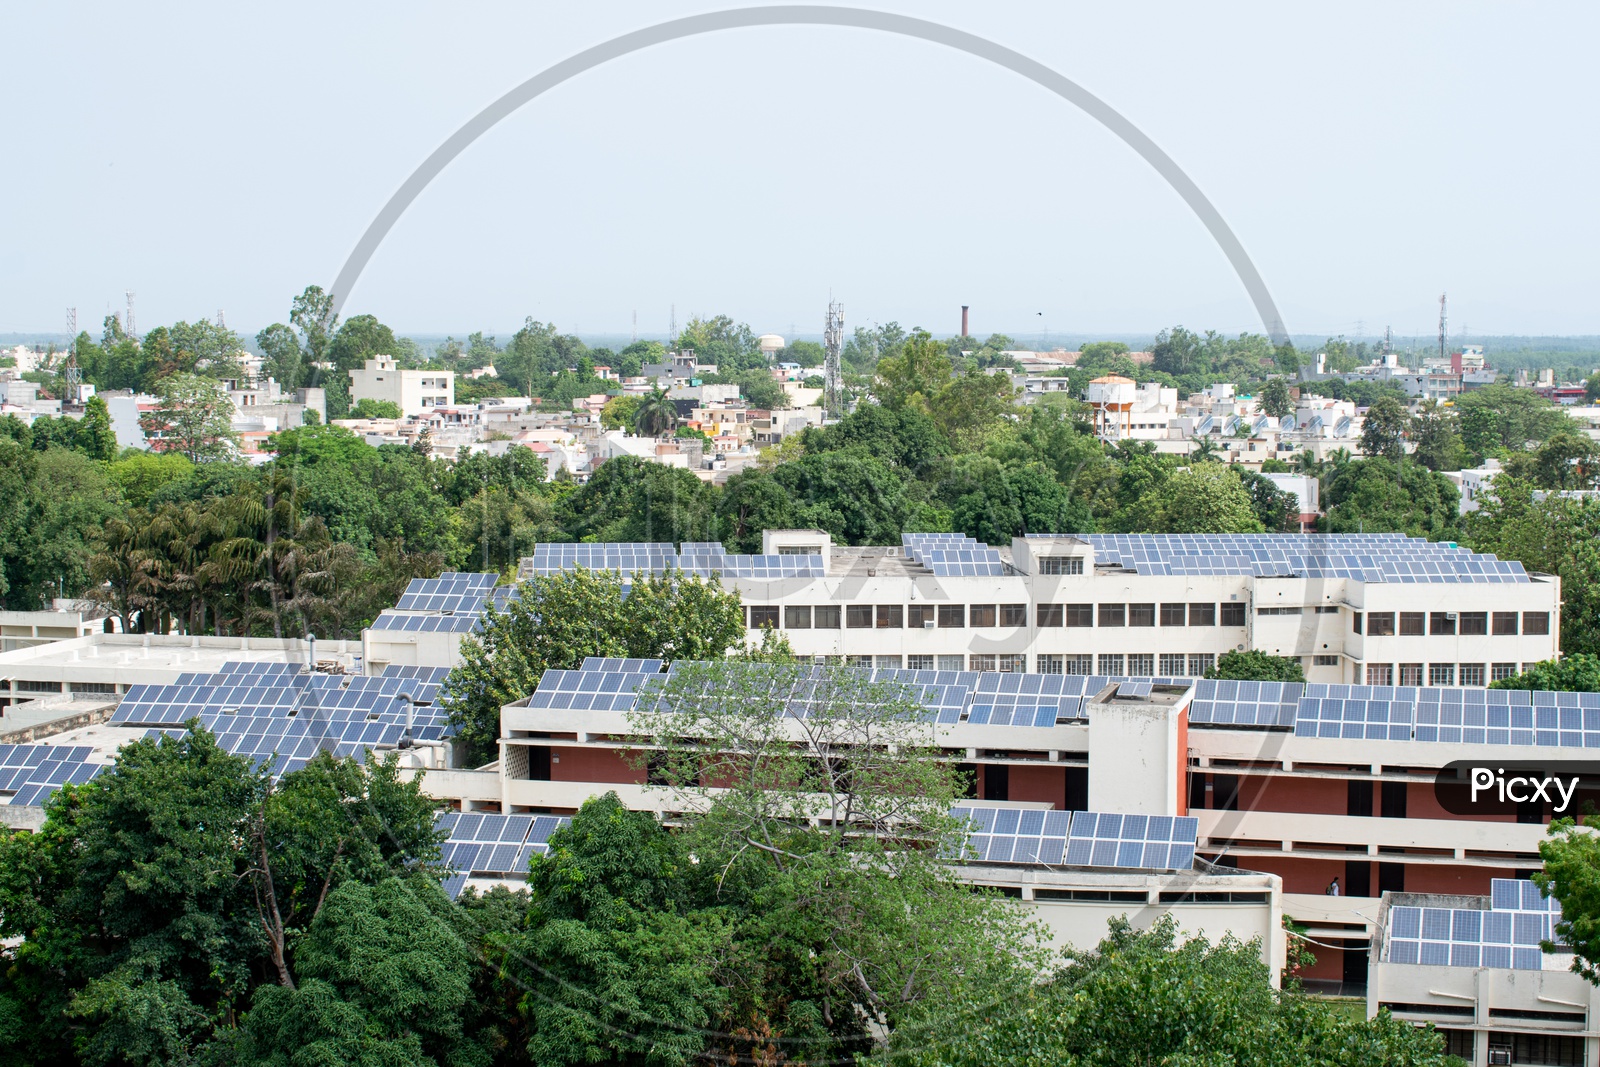 Solar Panels on a rooftop at Indian Institute of Technology Roorkee(IIT Roorkee)